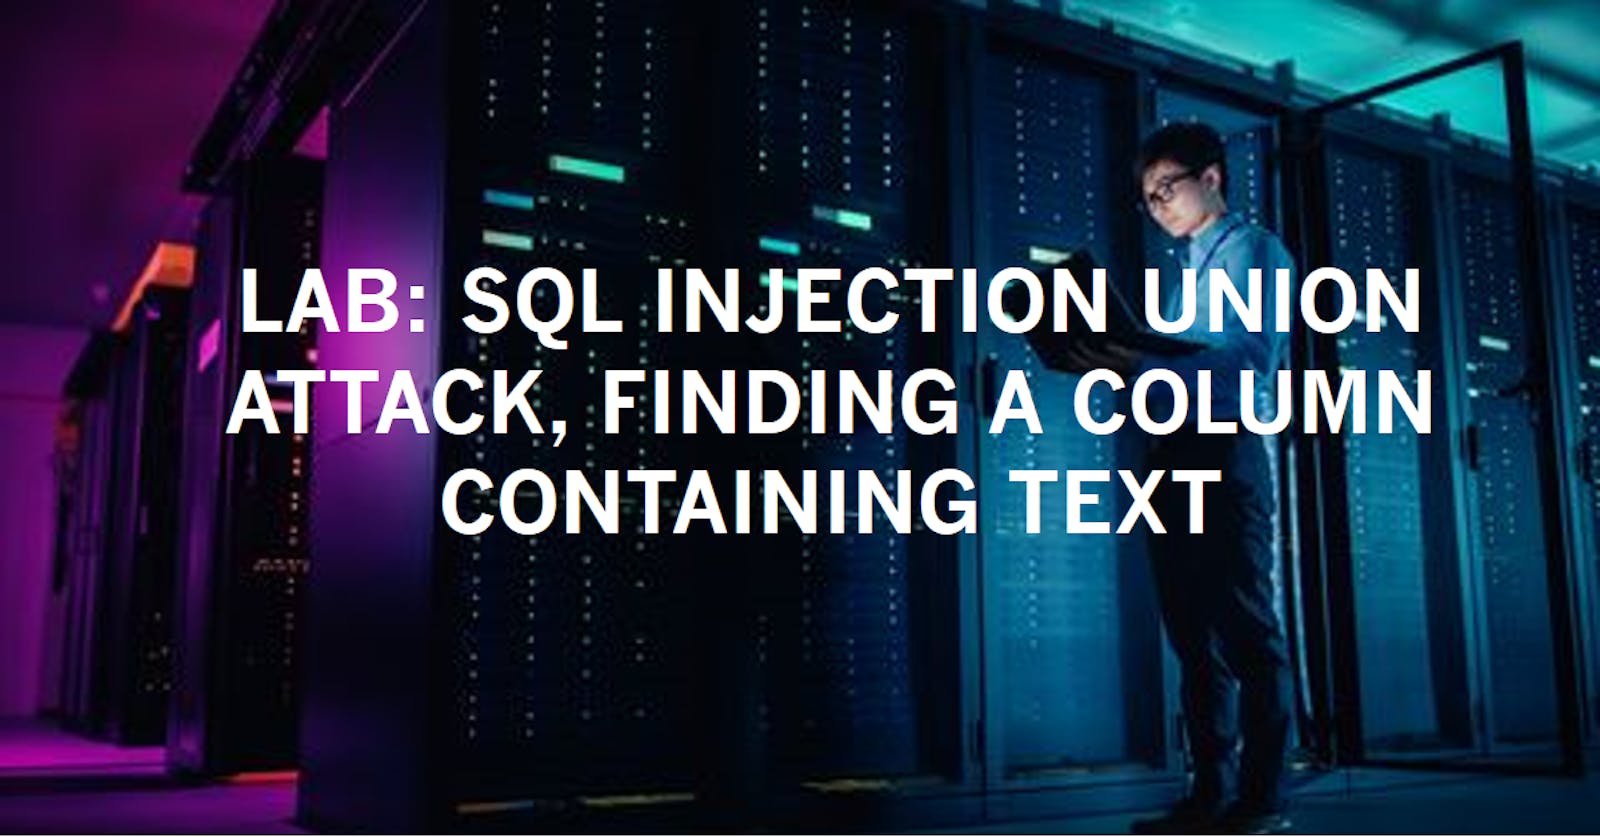 Lab: SQL injection UNION attack, finding a column containing text